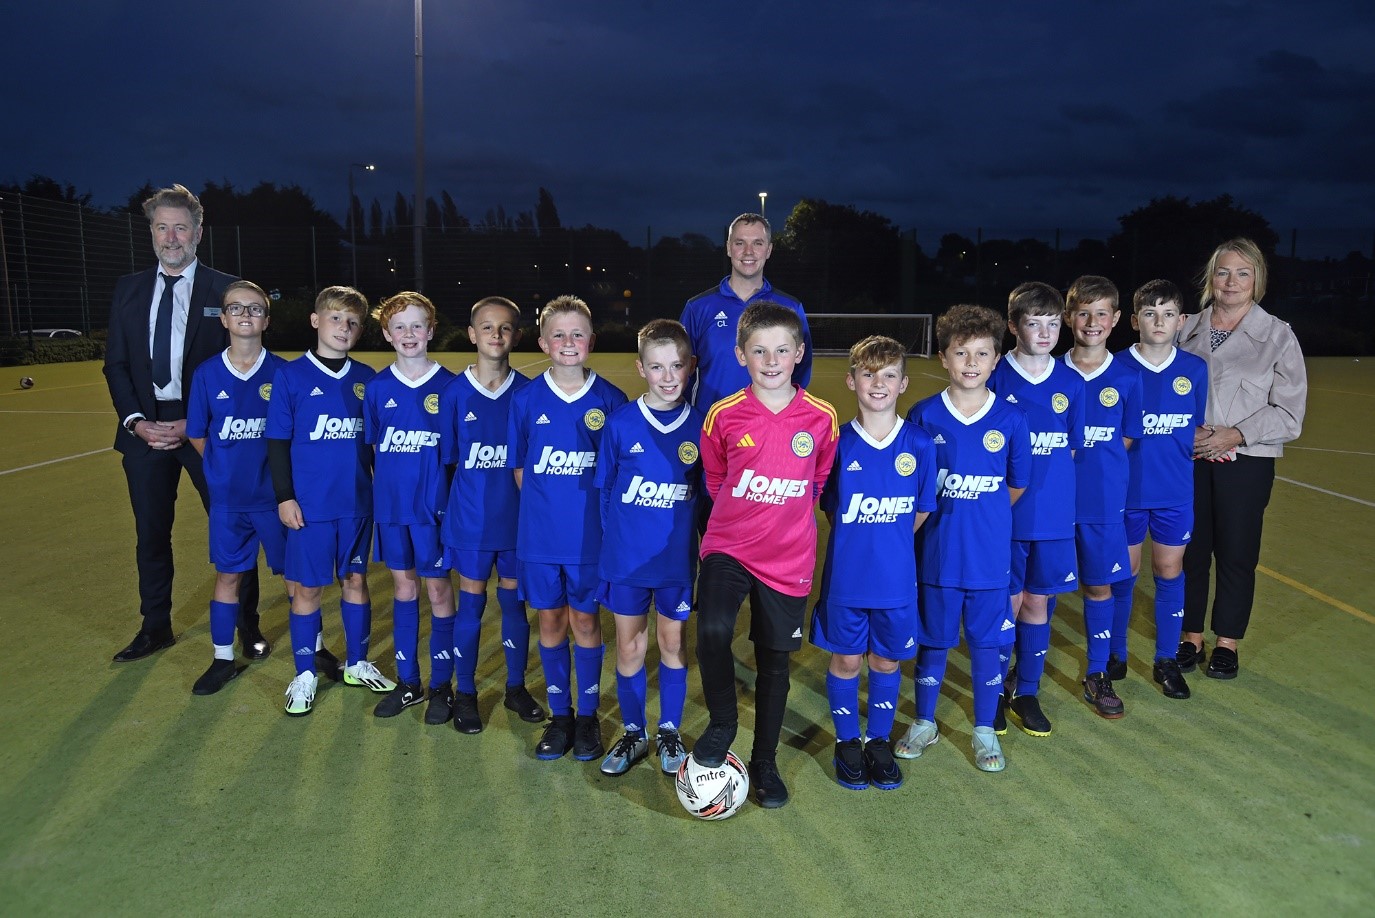 Young footballers in Worksop receive new kit thanks to Jones Homes